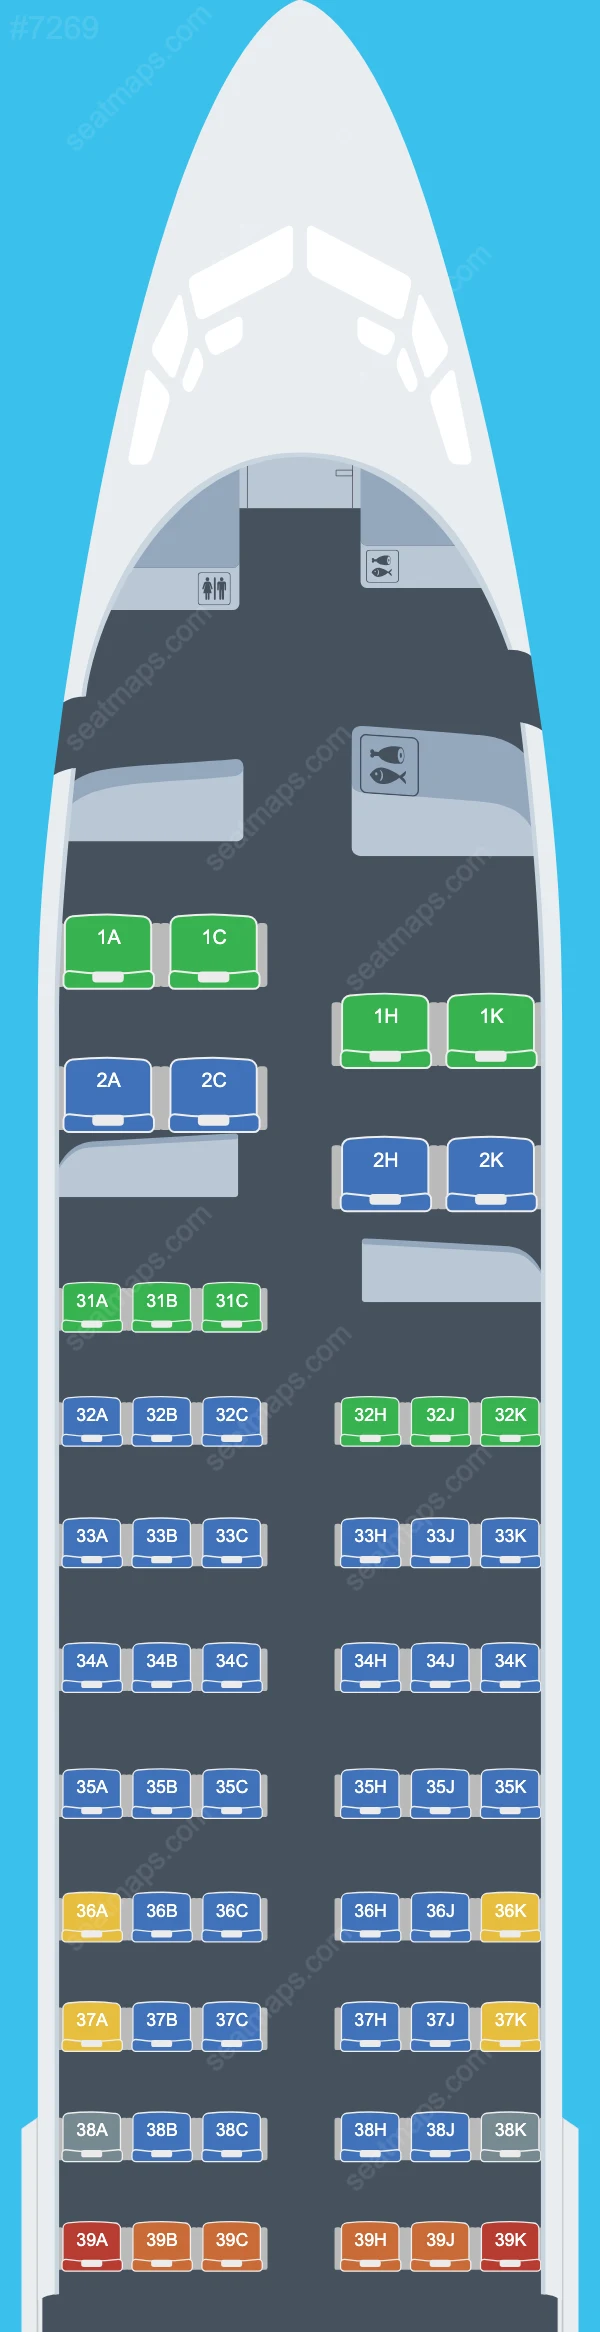 China Southern Boeing 737 Seat Maps 737-800 V.7